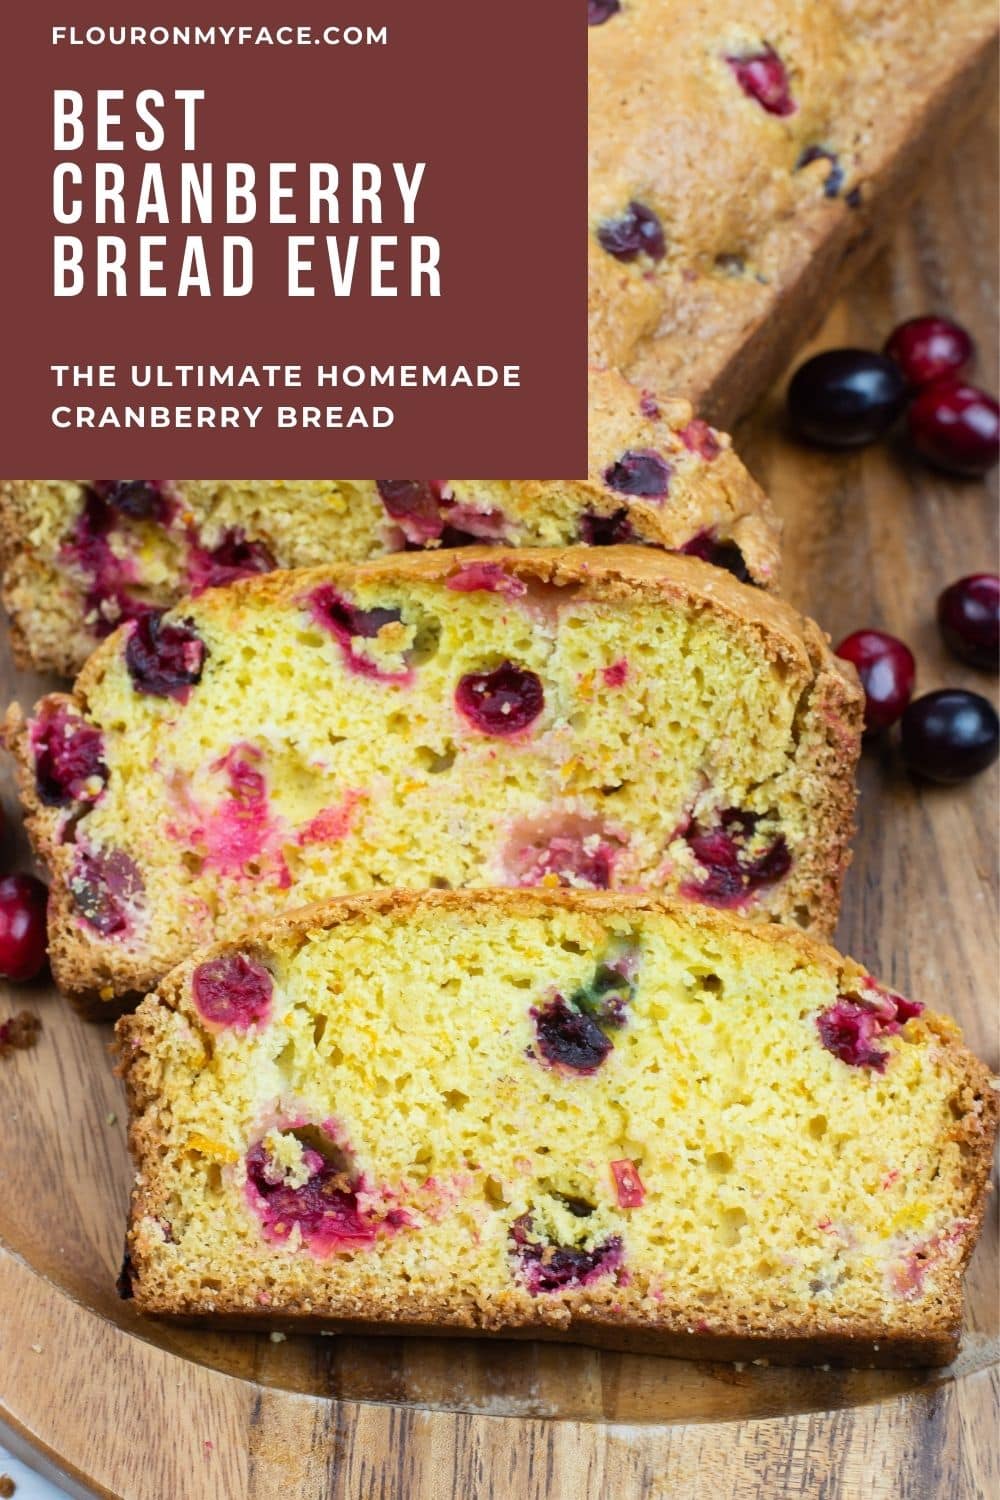 Slice of cranberry bread on cutting board.